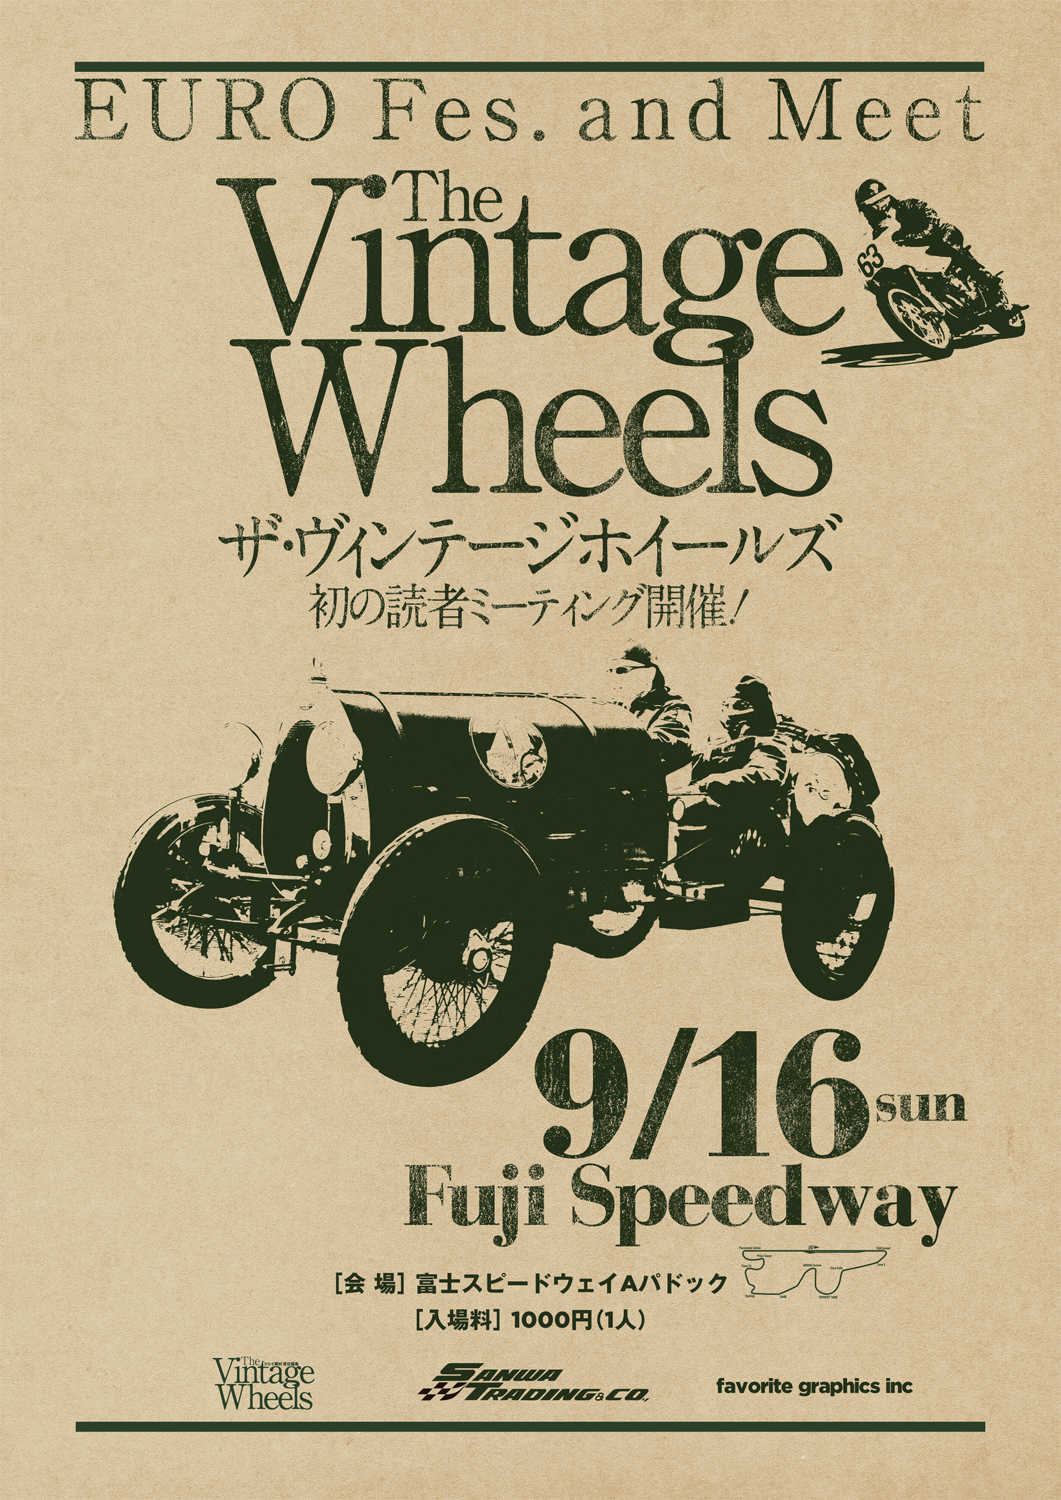 EURO Fes. and Meet The Vintage Wheels ! 開催のお知らせ